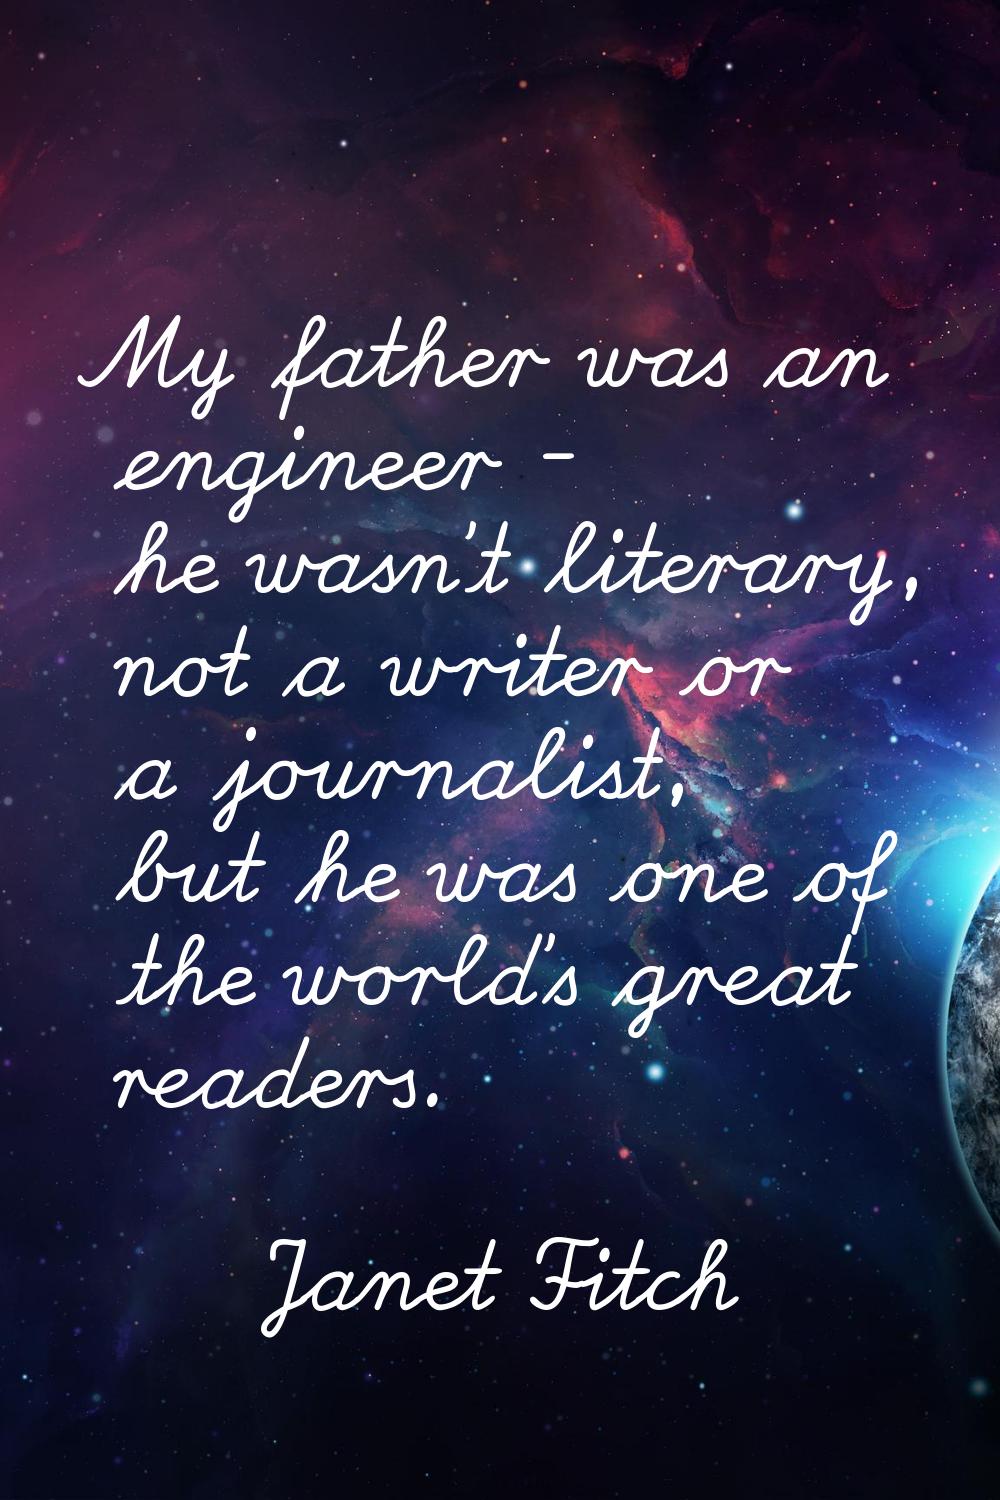 My father was an engineer - he wasn't literary, not a writer or a journalist, but he was one of the